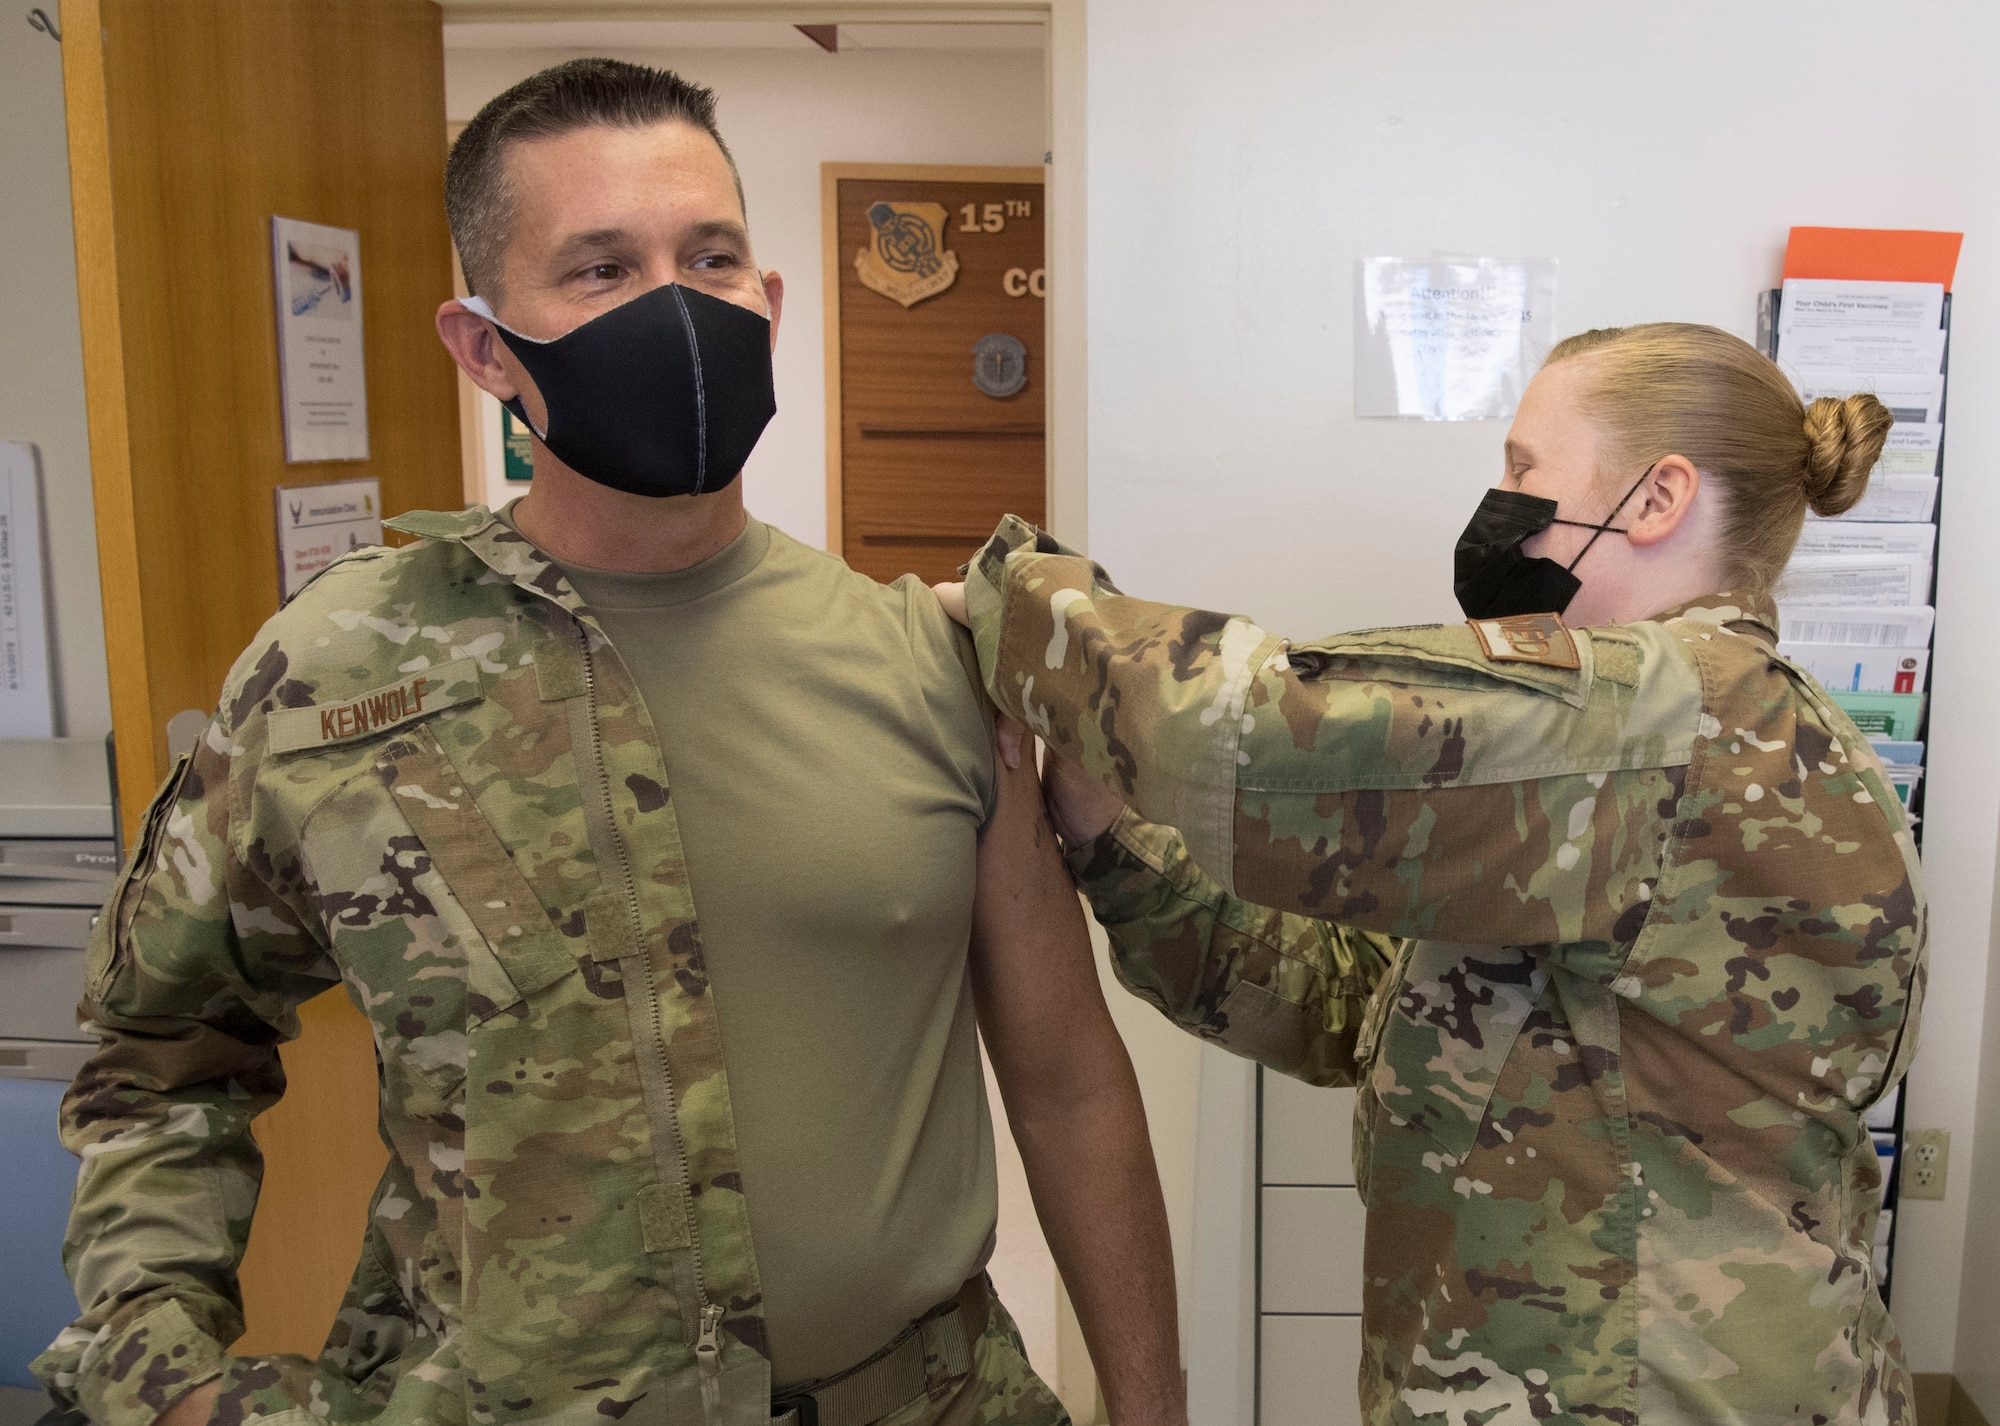 U.S. Air Force Senior Master Sgt. Lacey Sterling, with the 624th Aeromedical Staging Squadron administers a COVID-19 vaccine to Air Force Chief Master Sgt. James Kenwolf at Joint Base Pearl Harbor-Hickam, Hawaii, March 7, 2021, during the Unit Training Assembly.